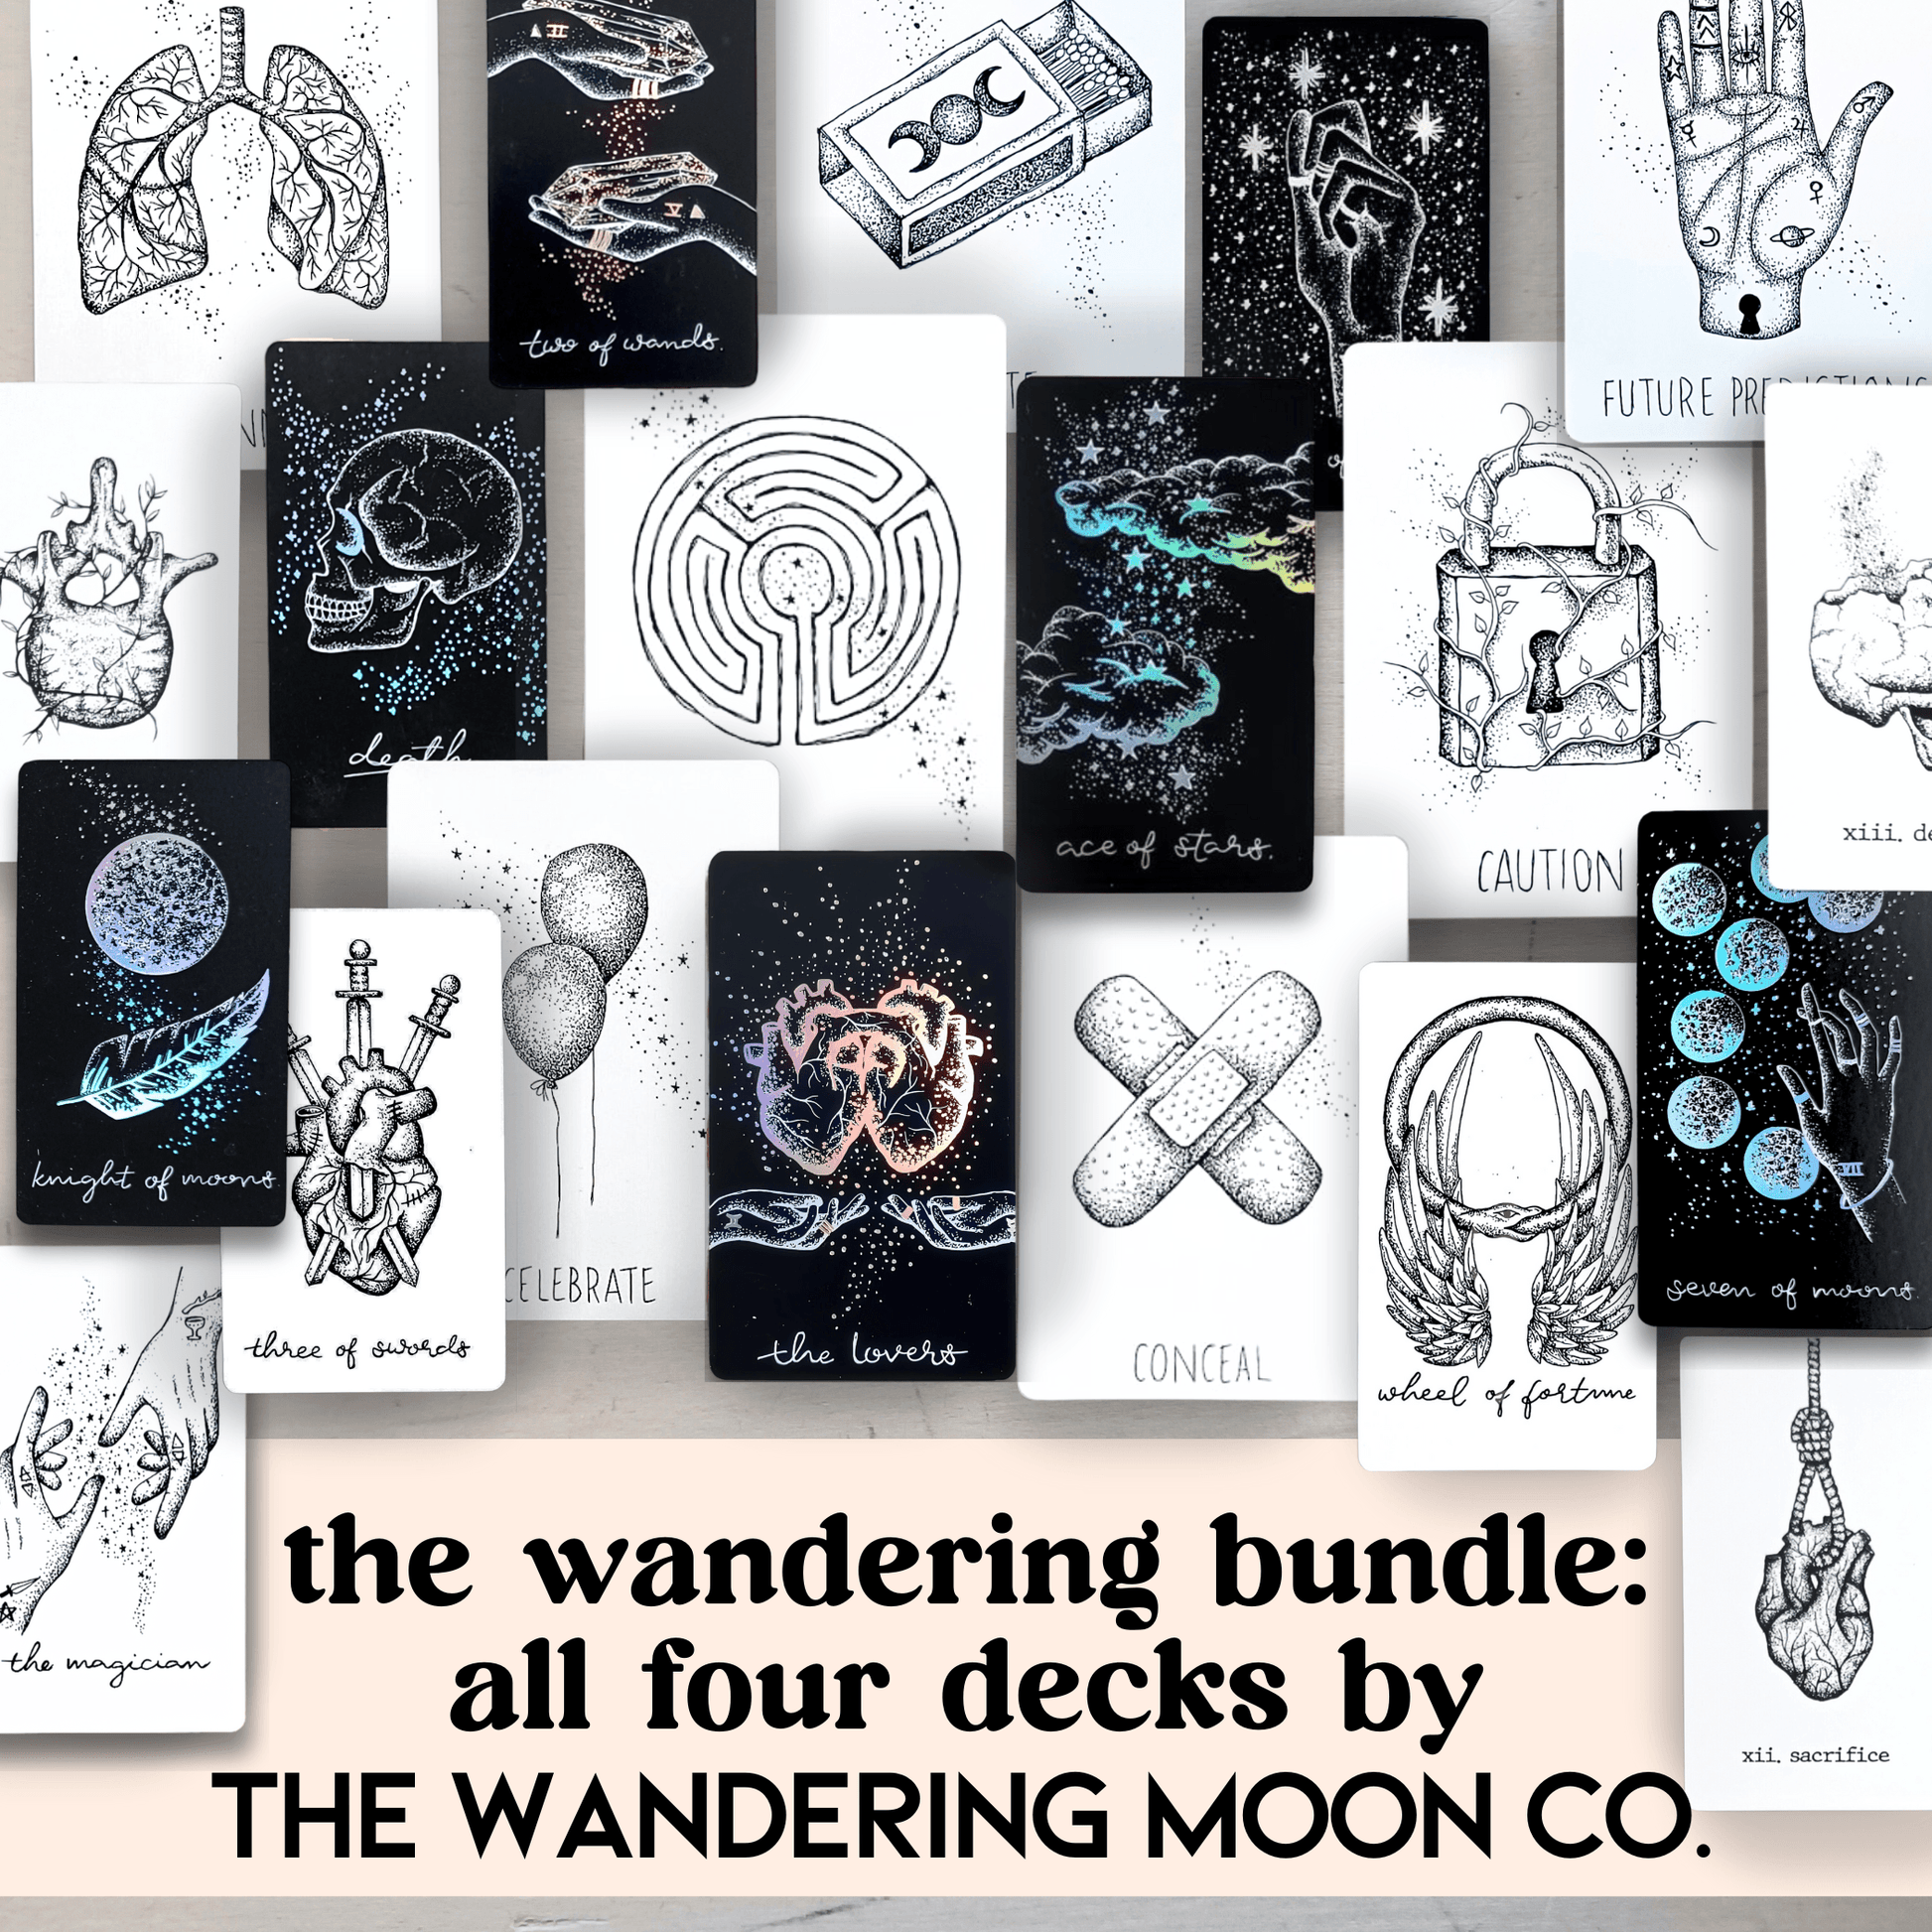 tarot card journal page: the shadow card | digital, printable, download PDF - The Wandering Moon Co.